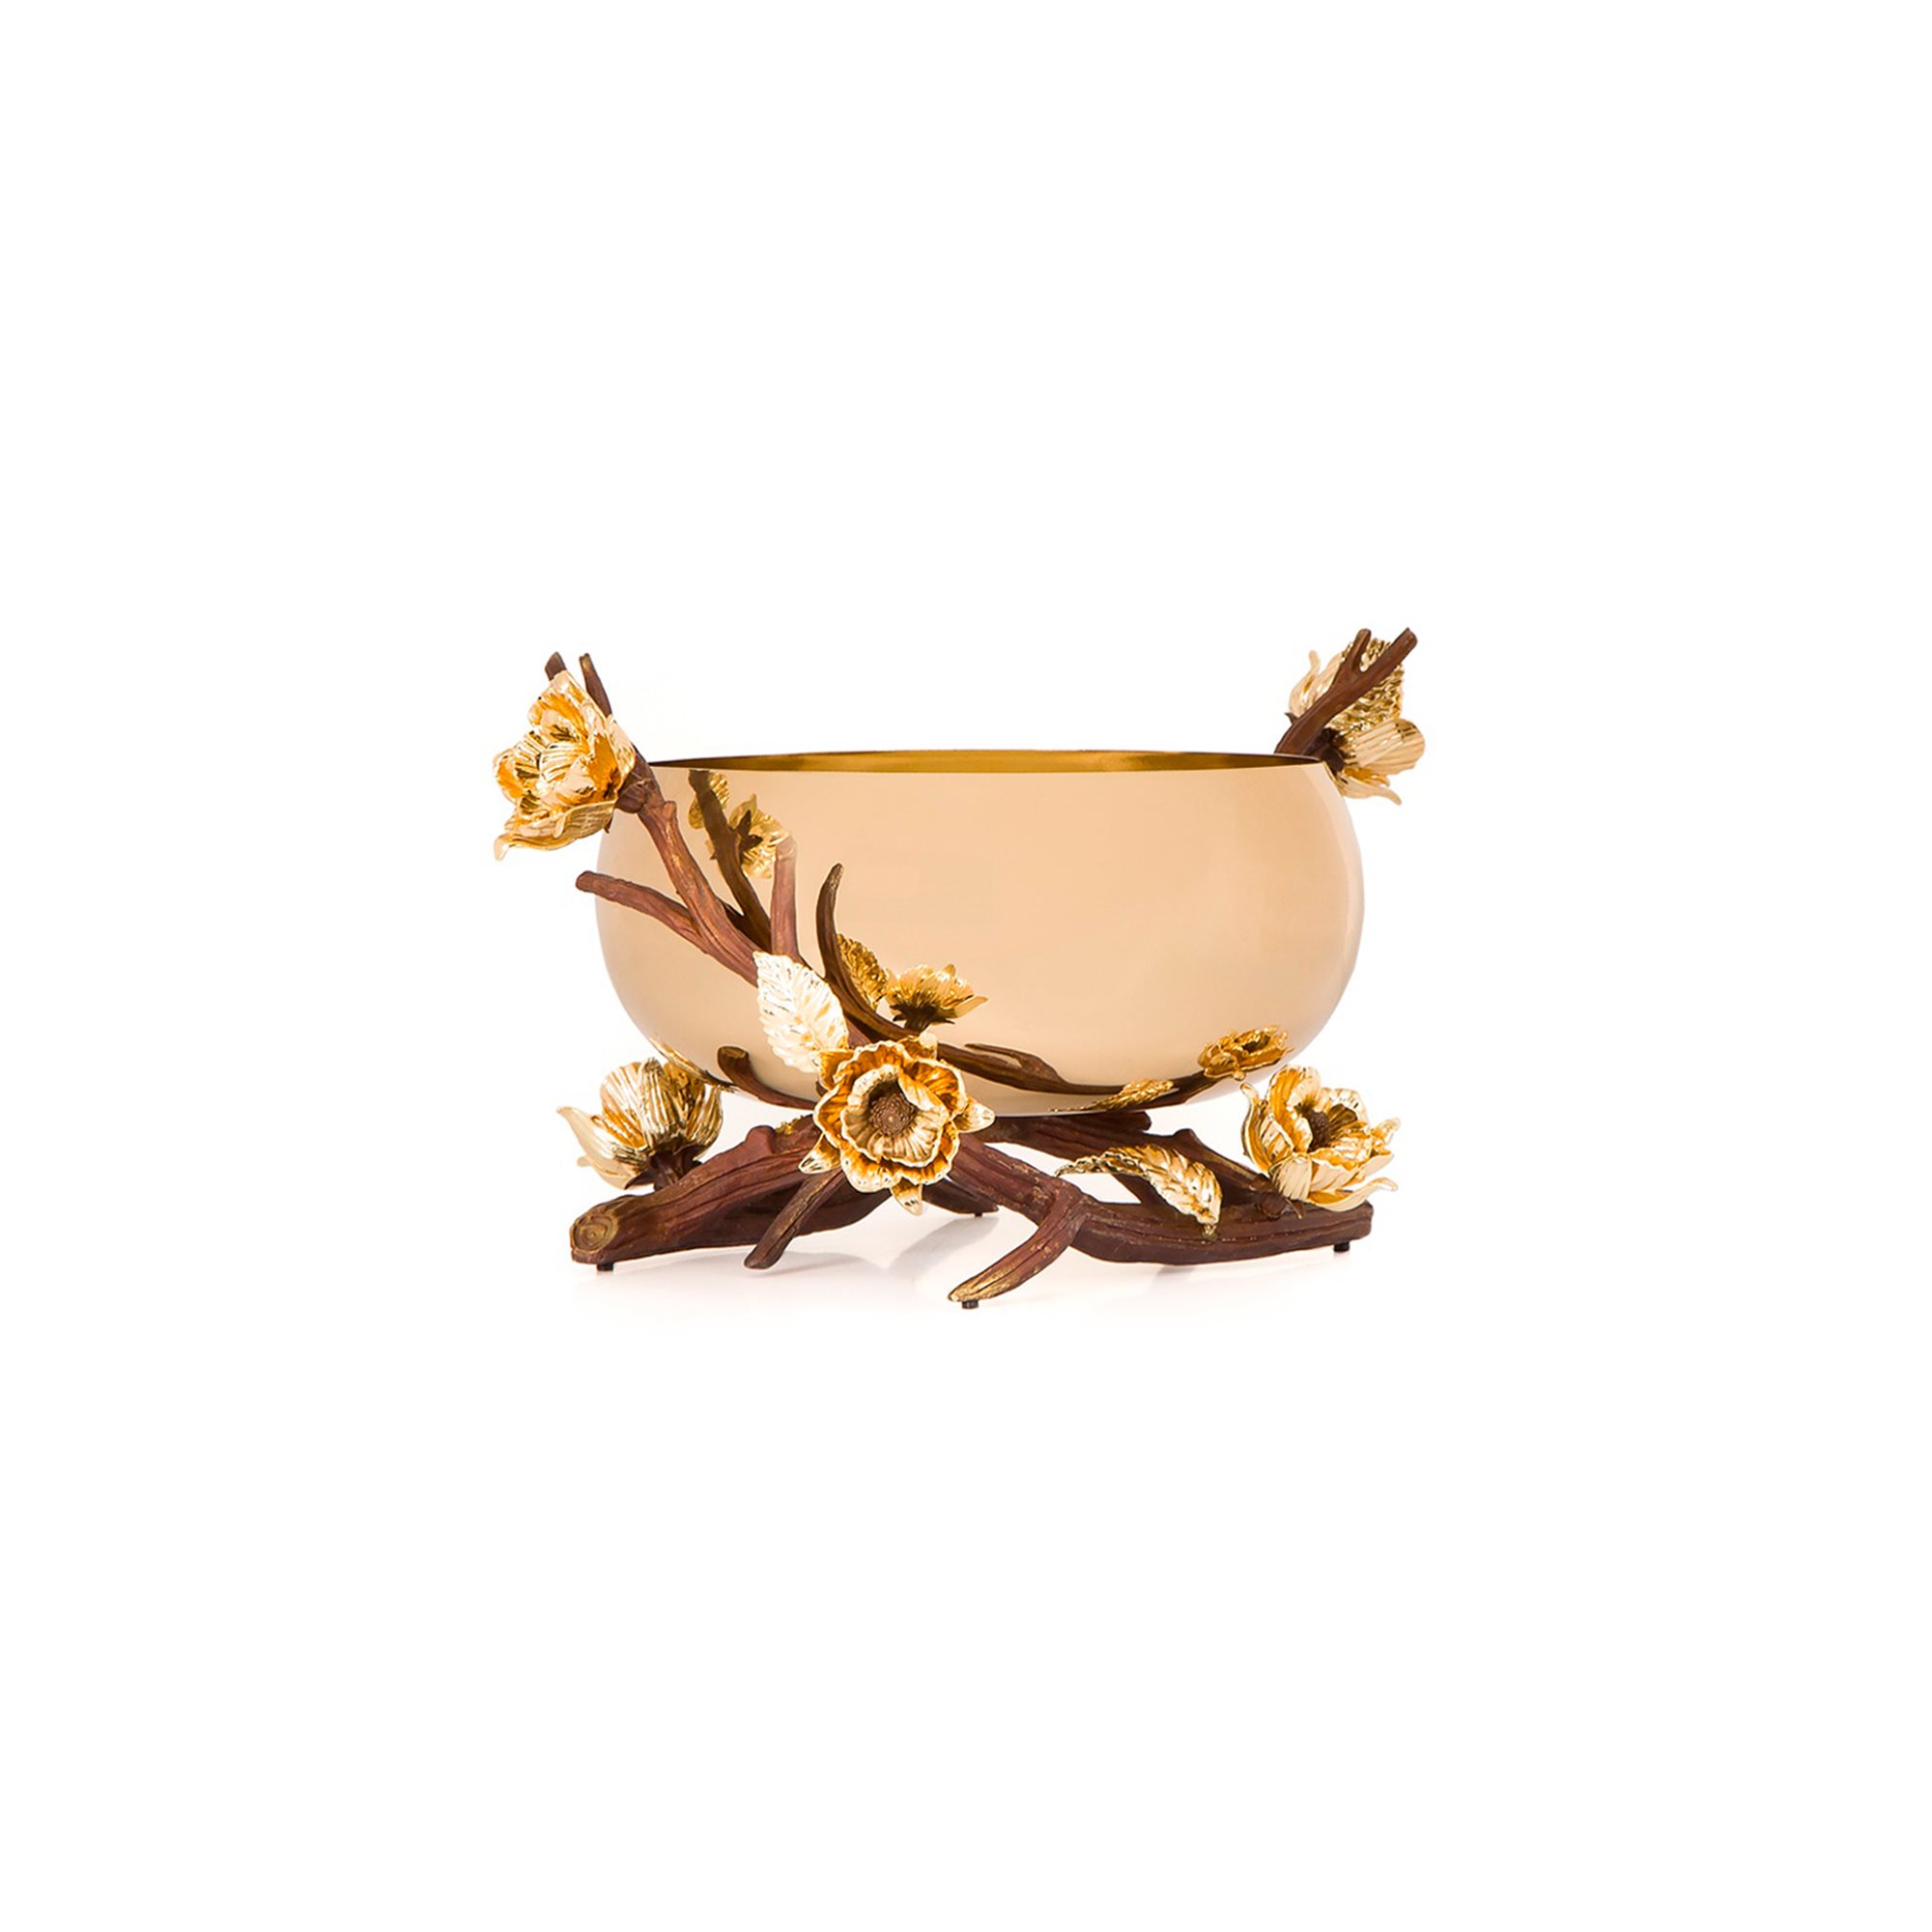 Anika Serving Bowl - Double Branches (Size C3)